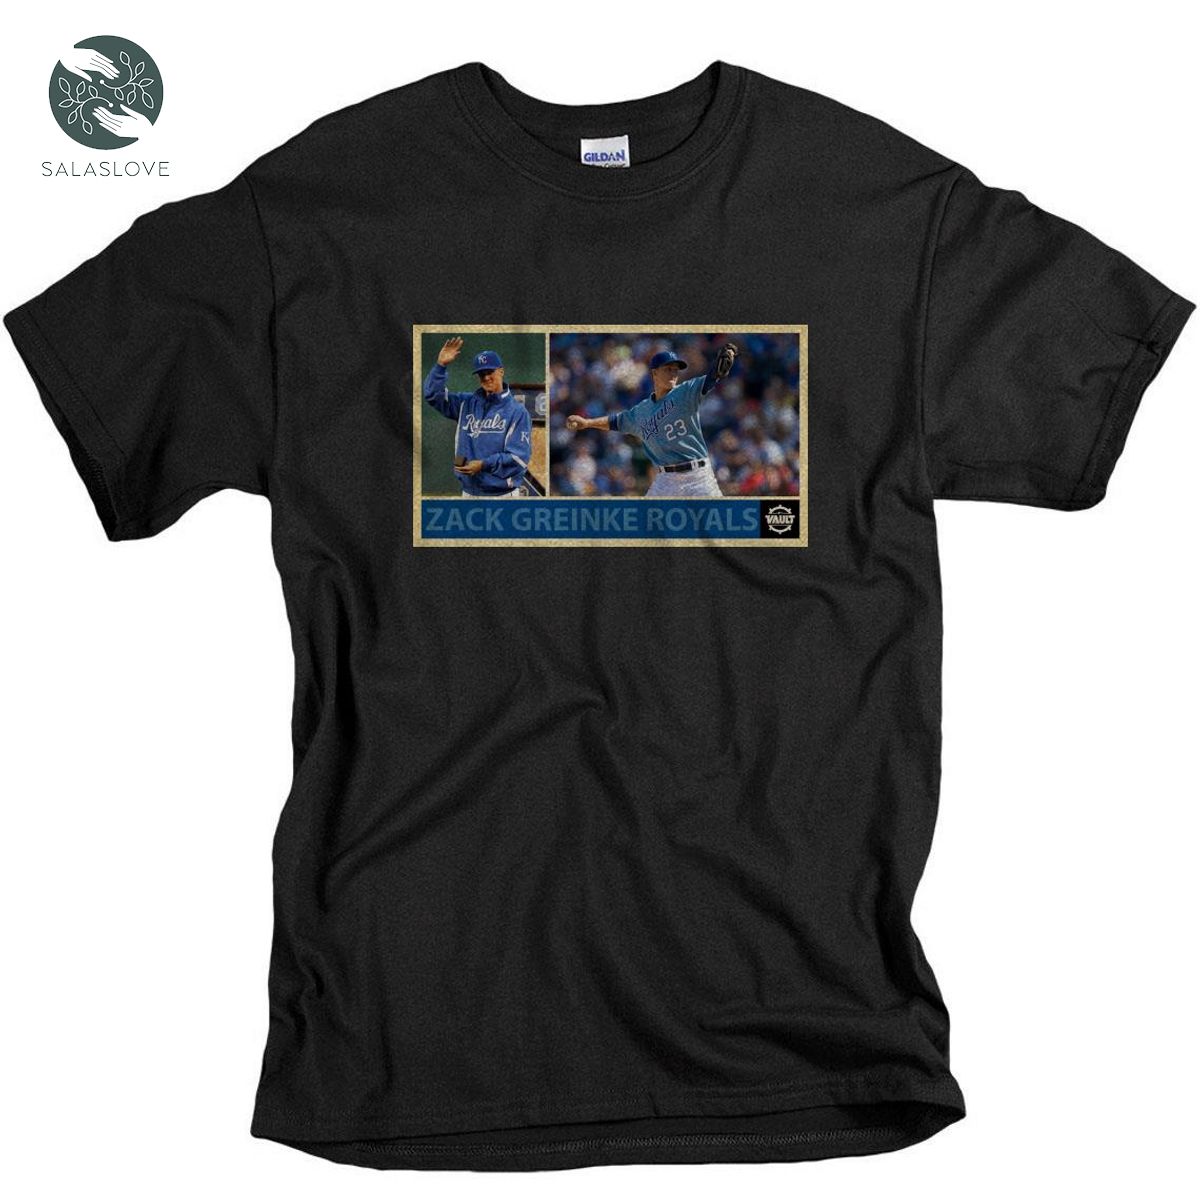 Zack Greinke Is Back With The Royals! T-shirt